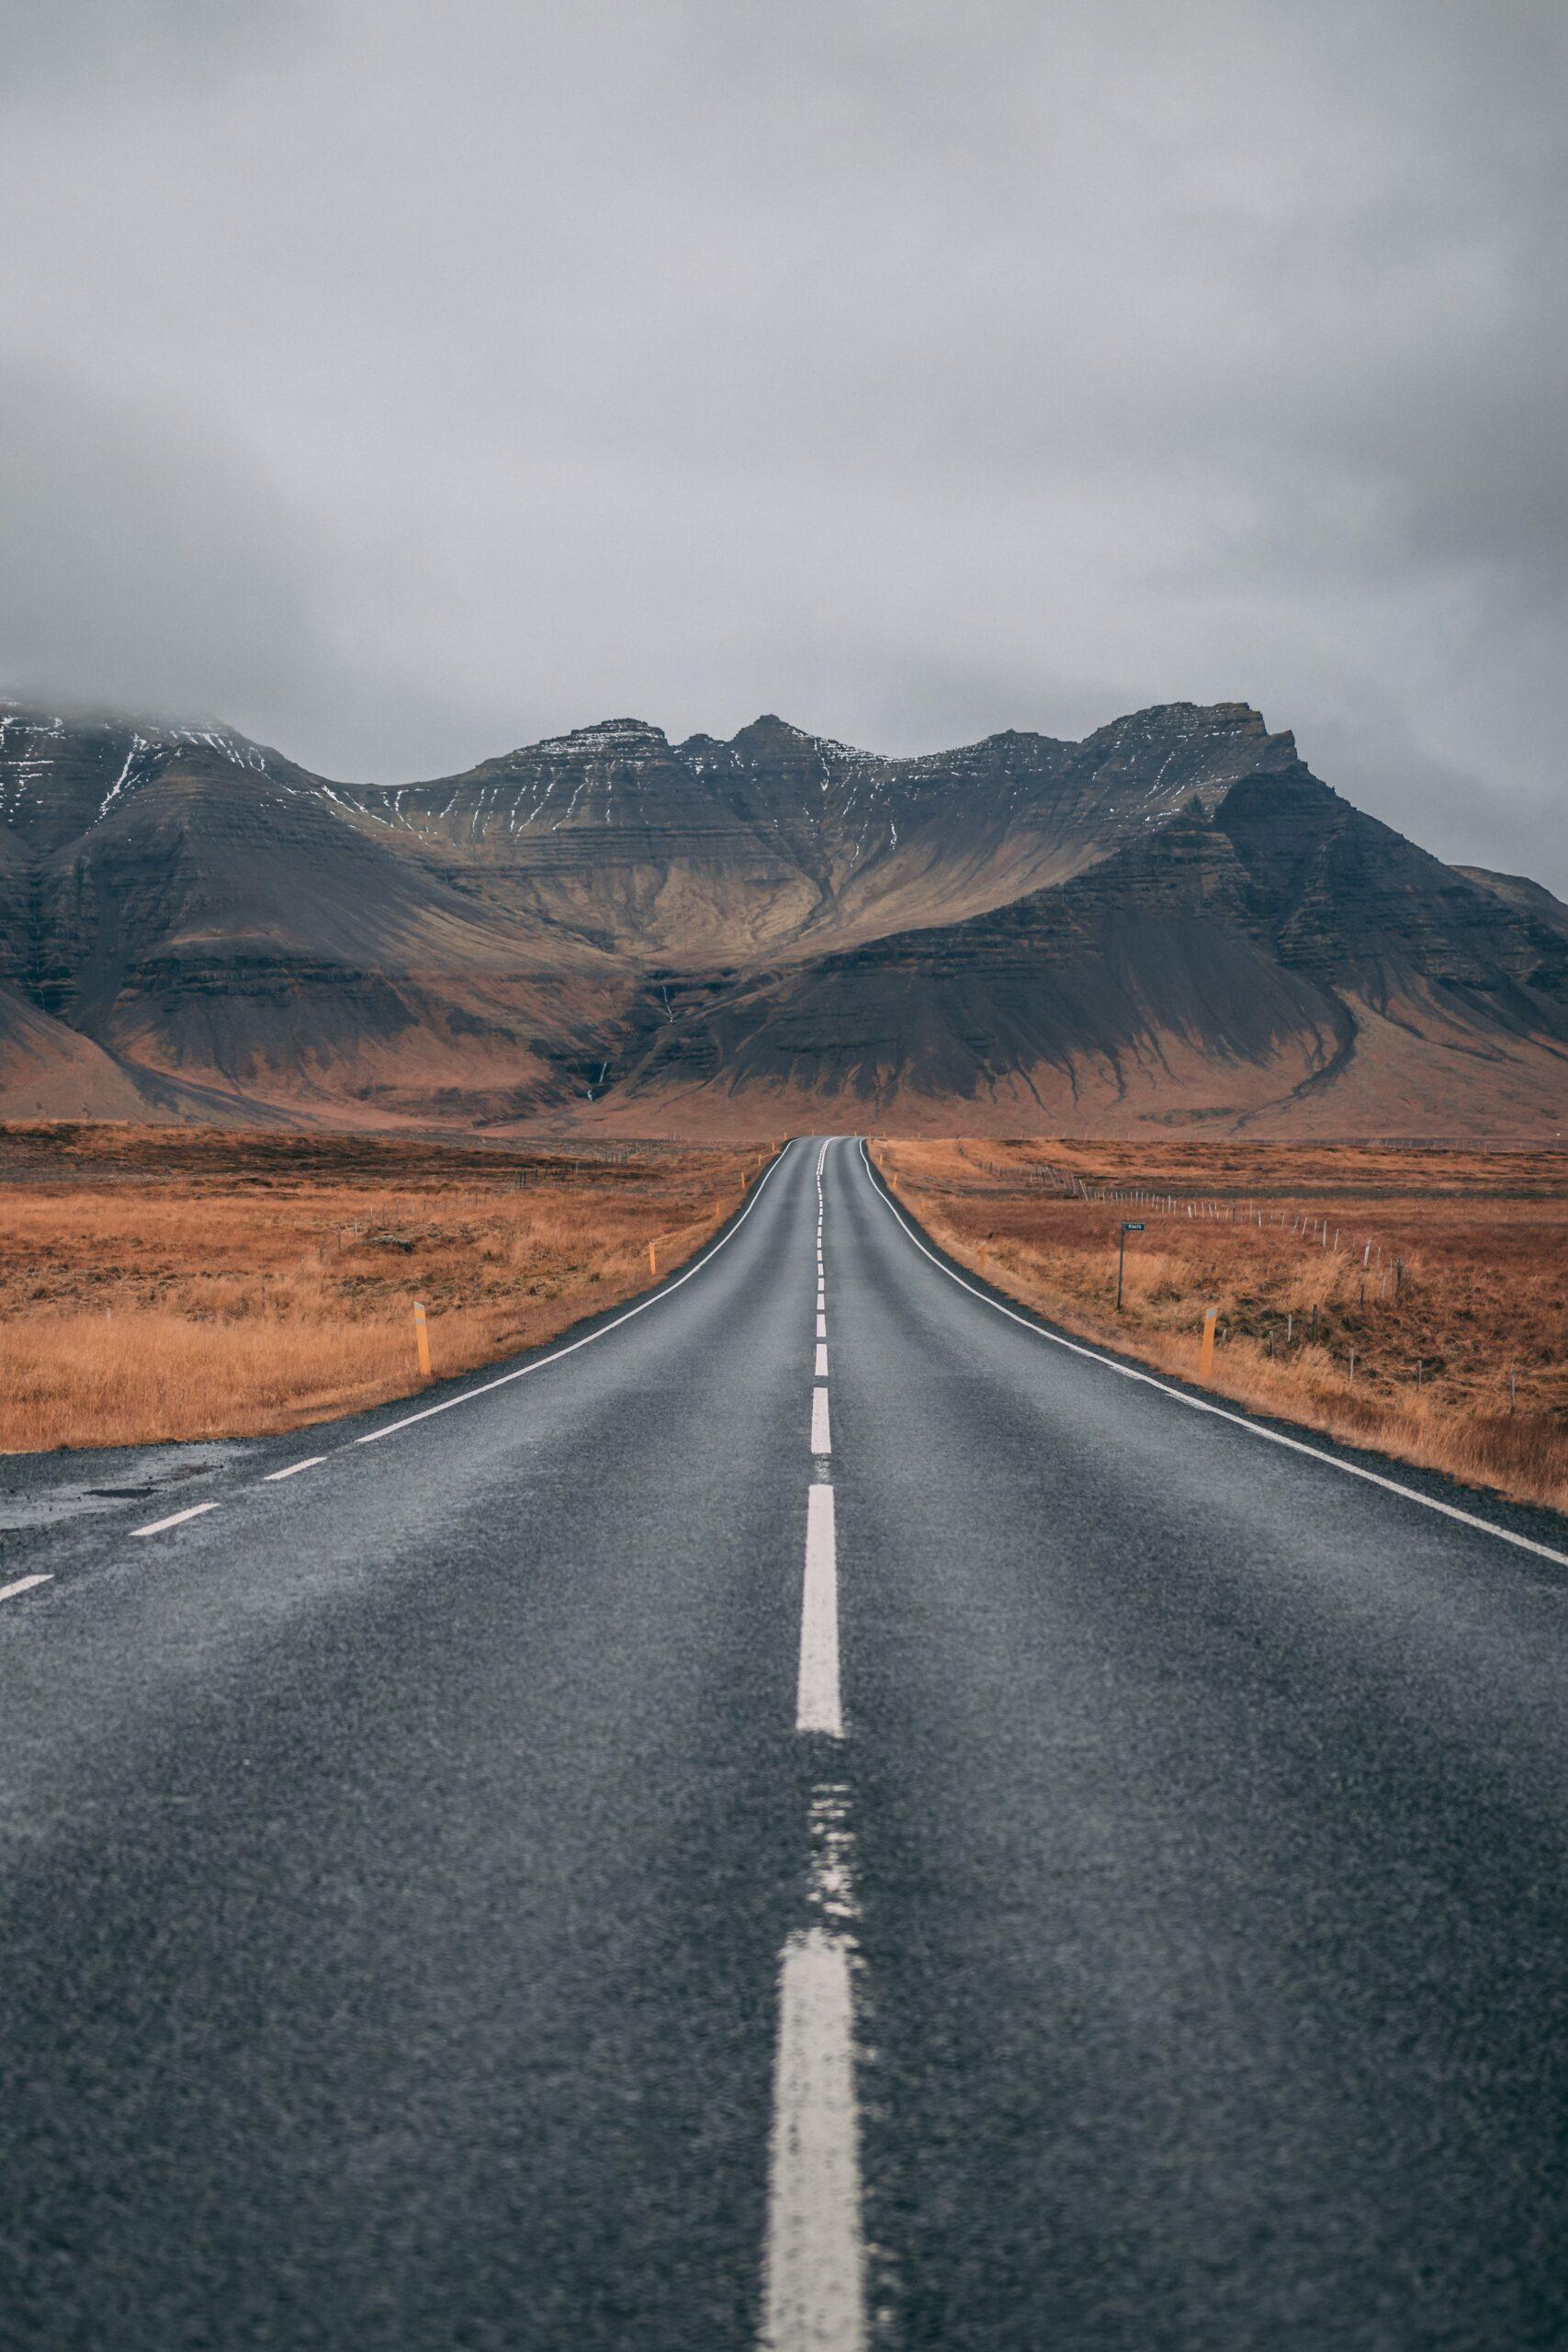 The open road to the mountains sparks idea of adventure